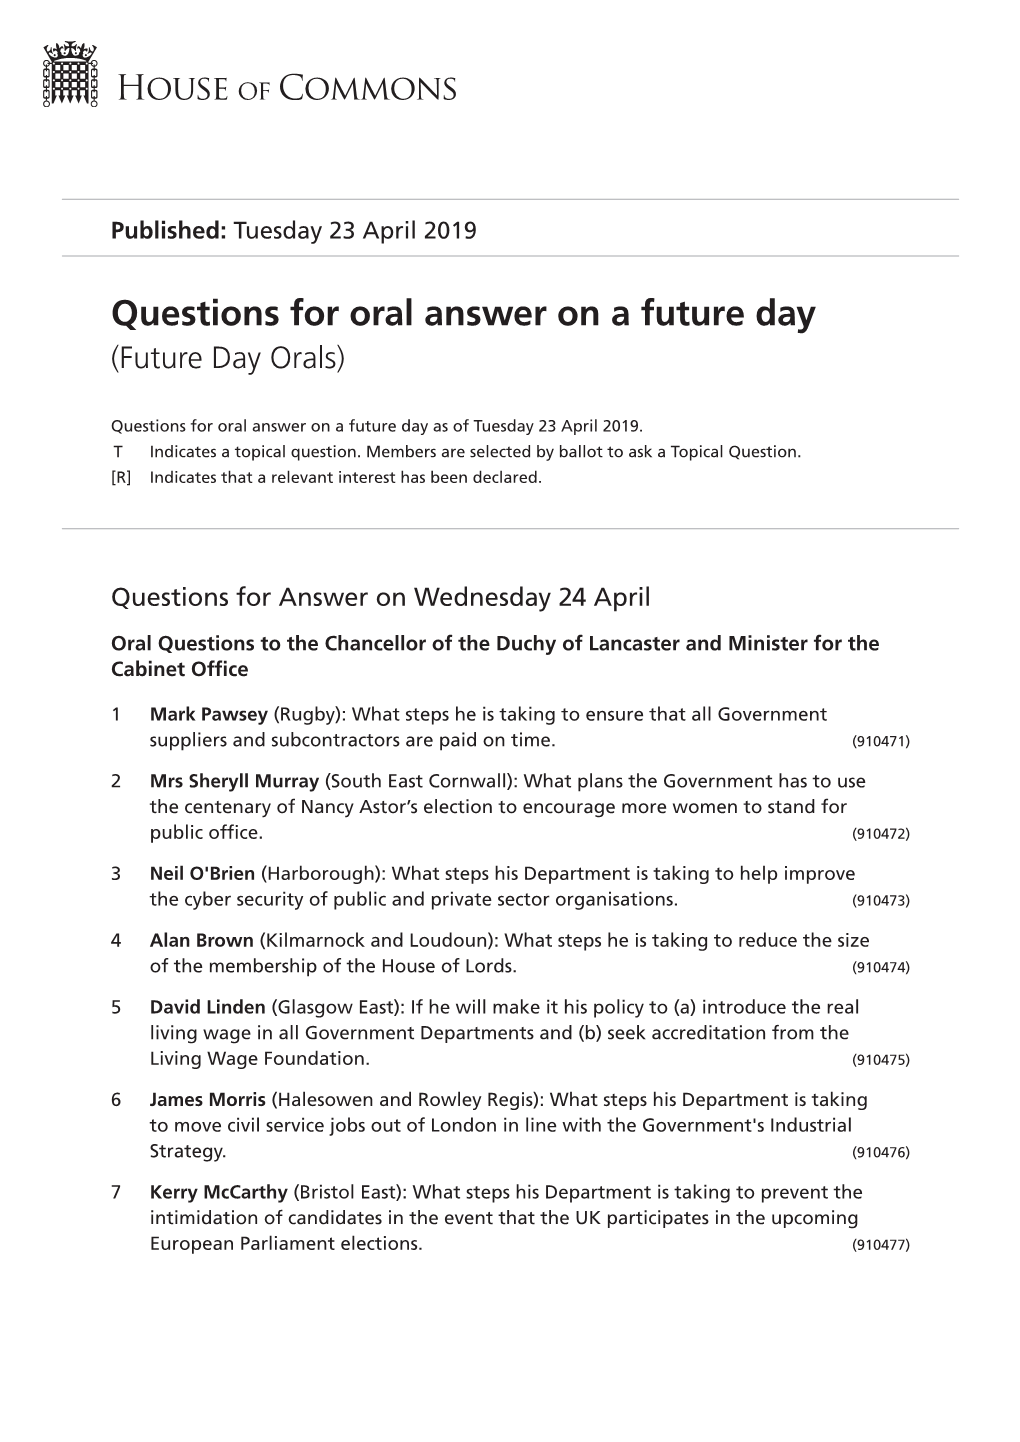 Future Oral Questions As of Tue 23 Apr 2019